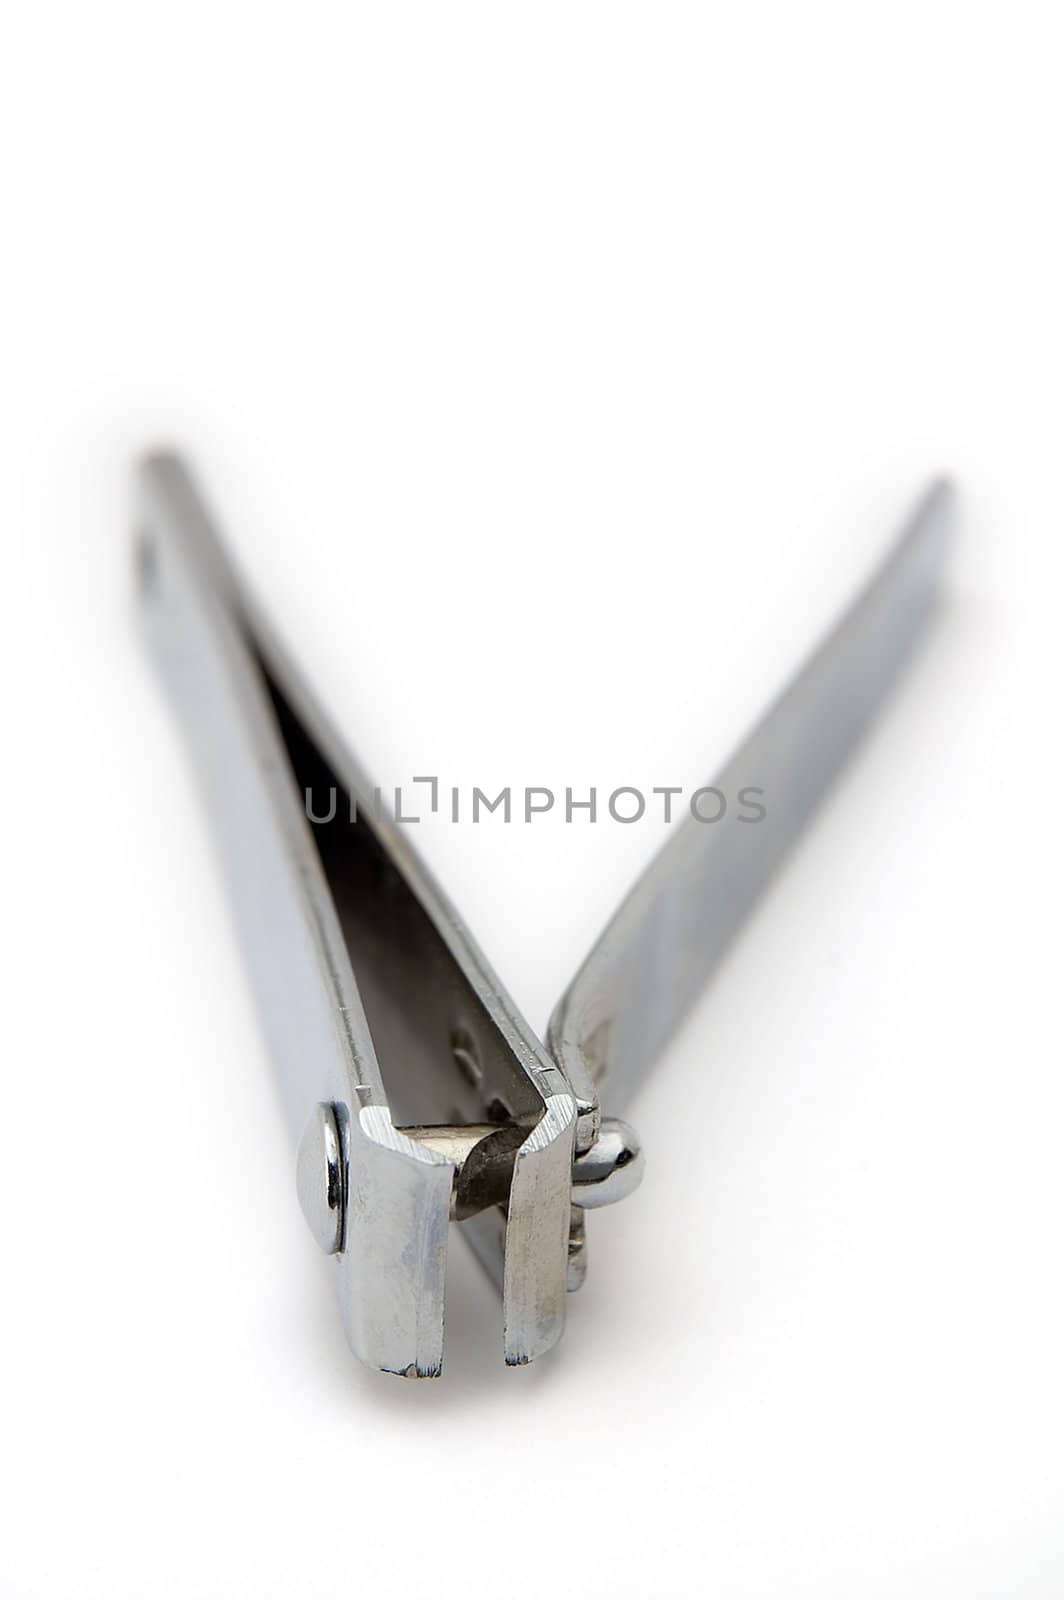 rustless nail cutter isolated on white background, distance blur